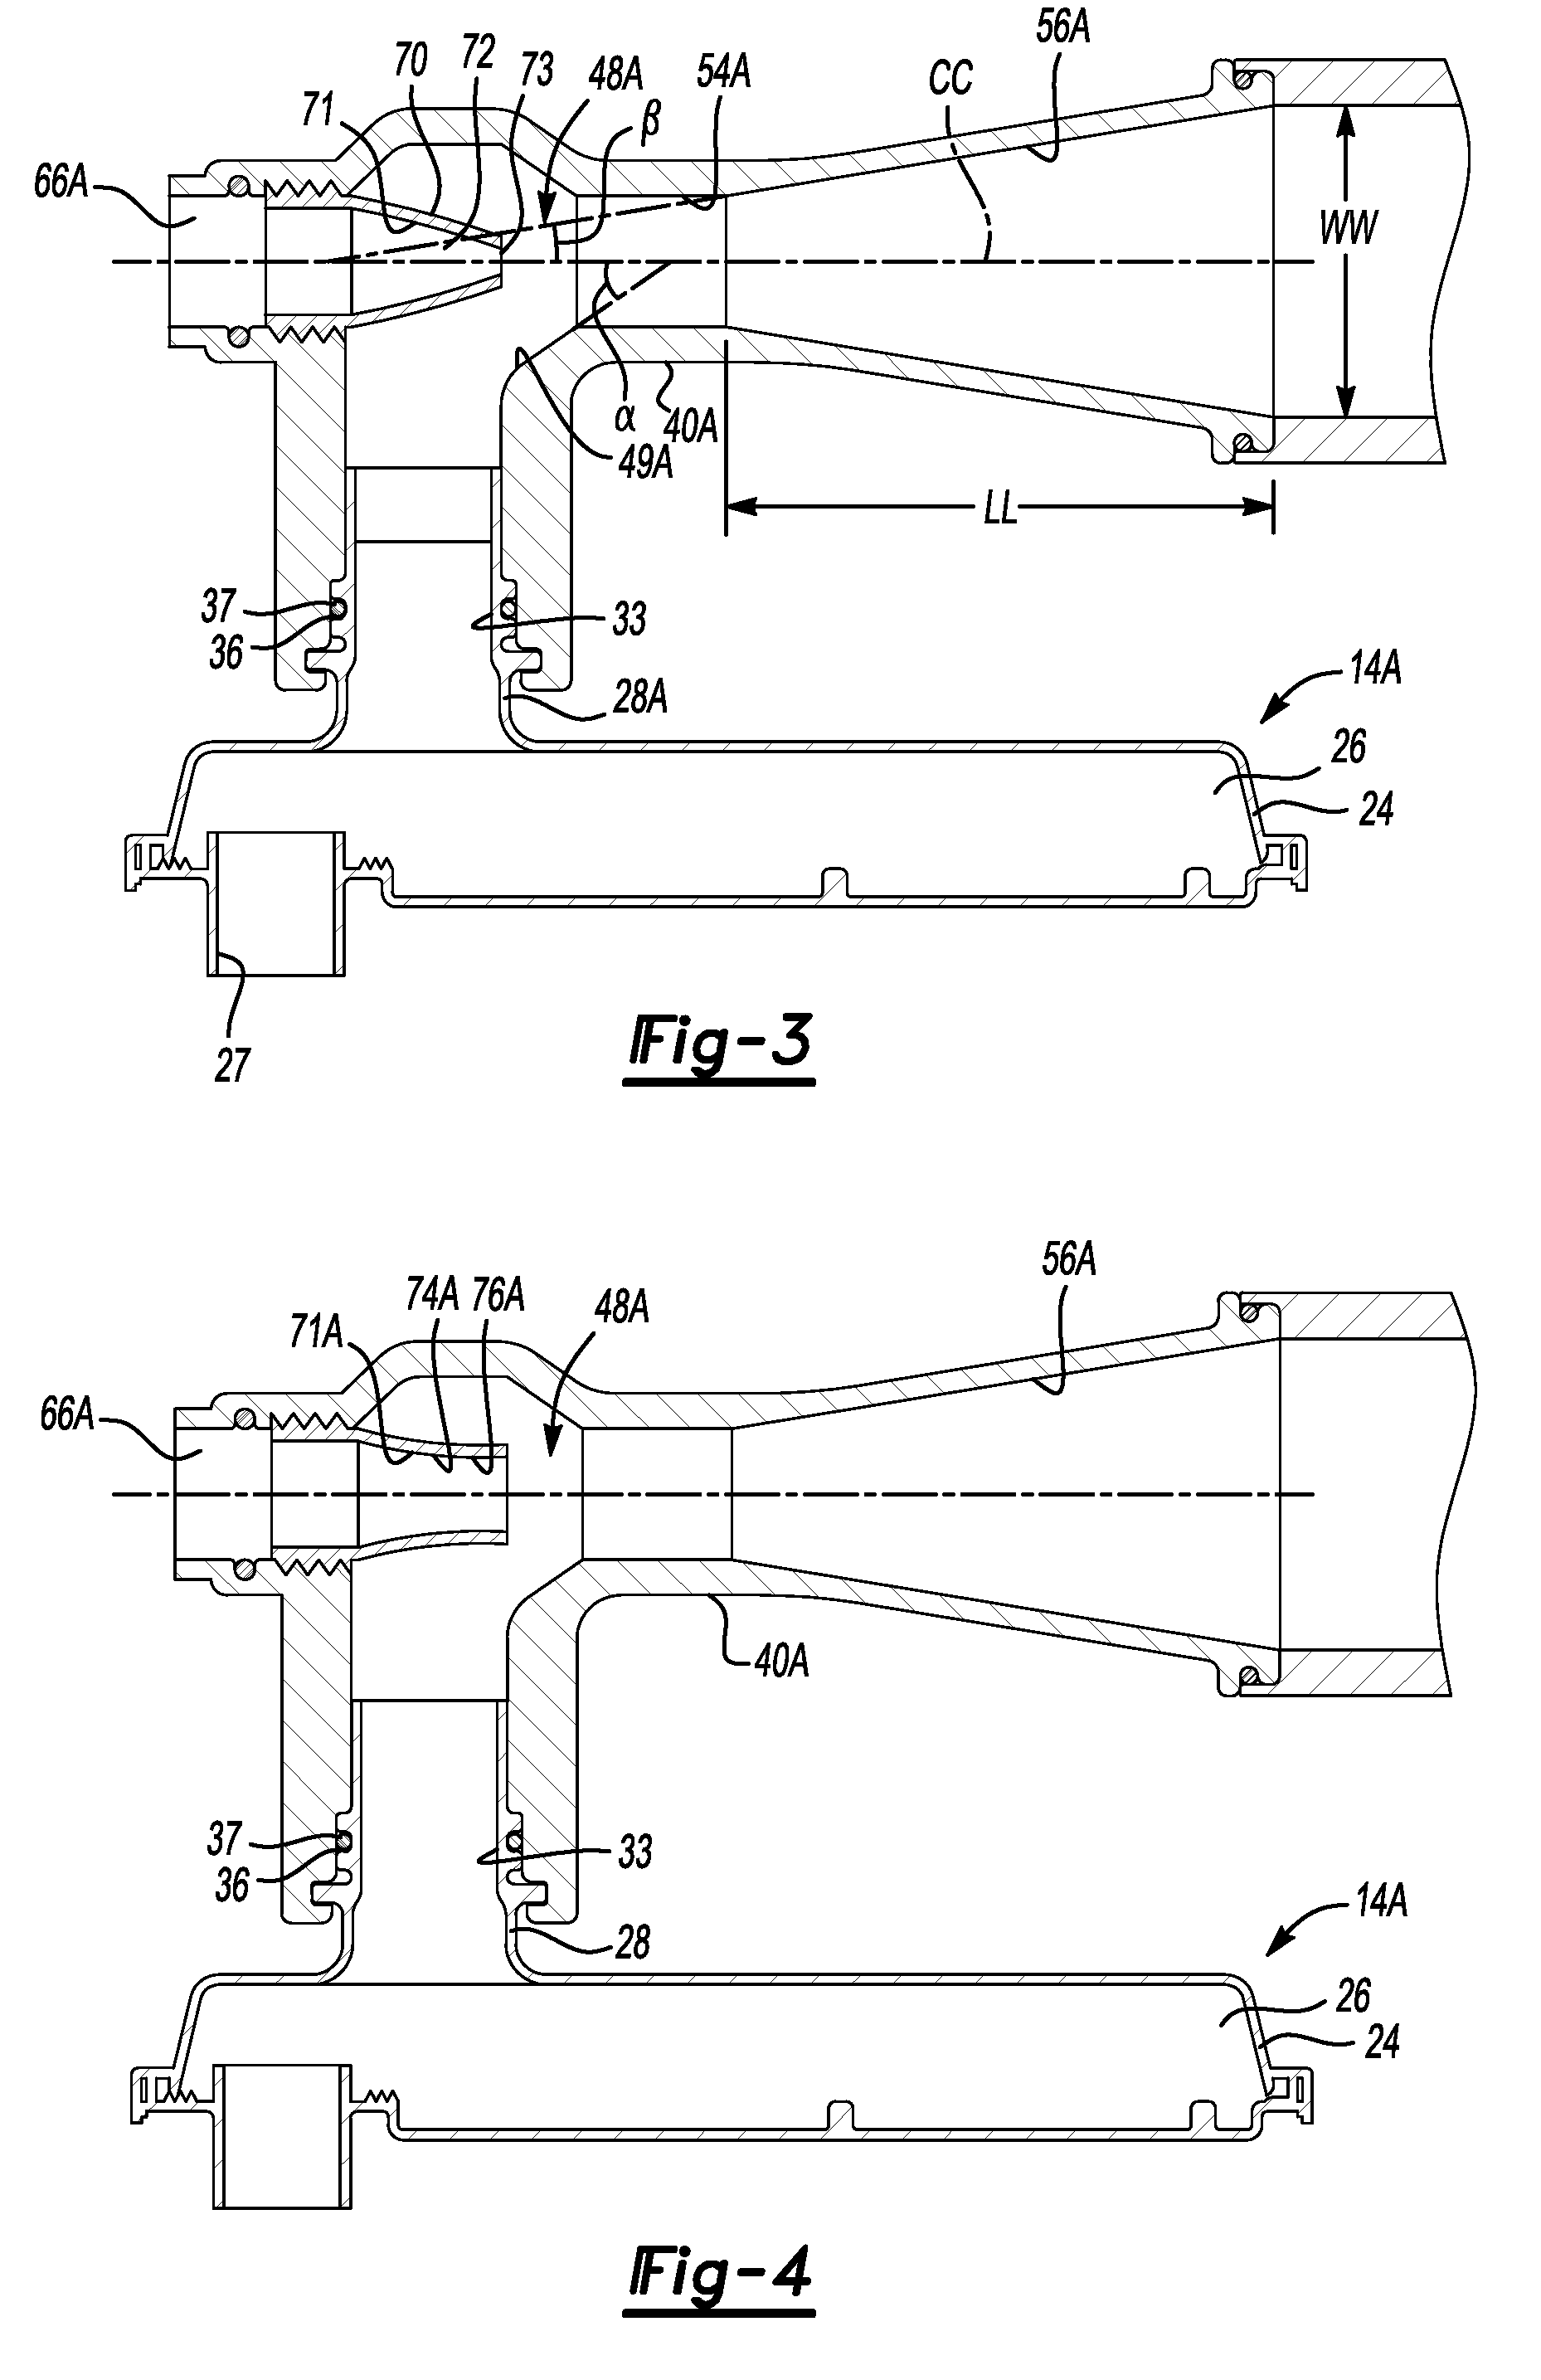 Hydraulic System For A Transmission With Pump Inlet Diffuser